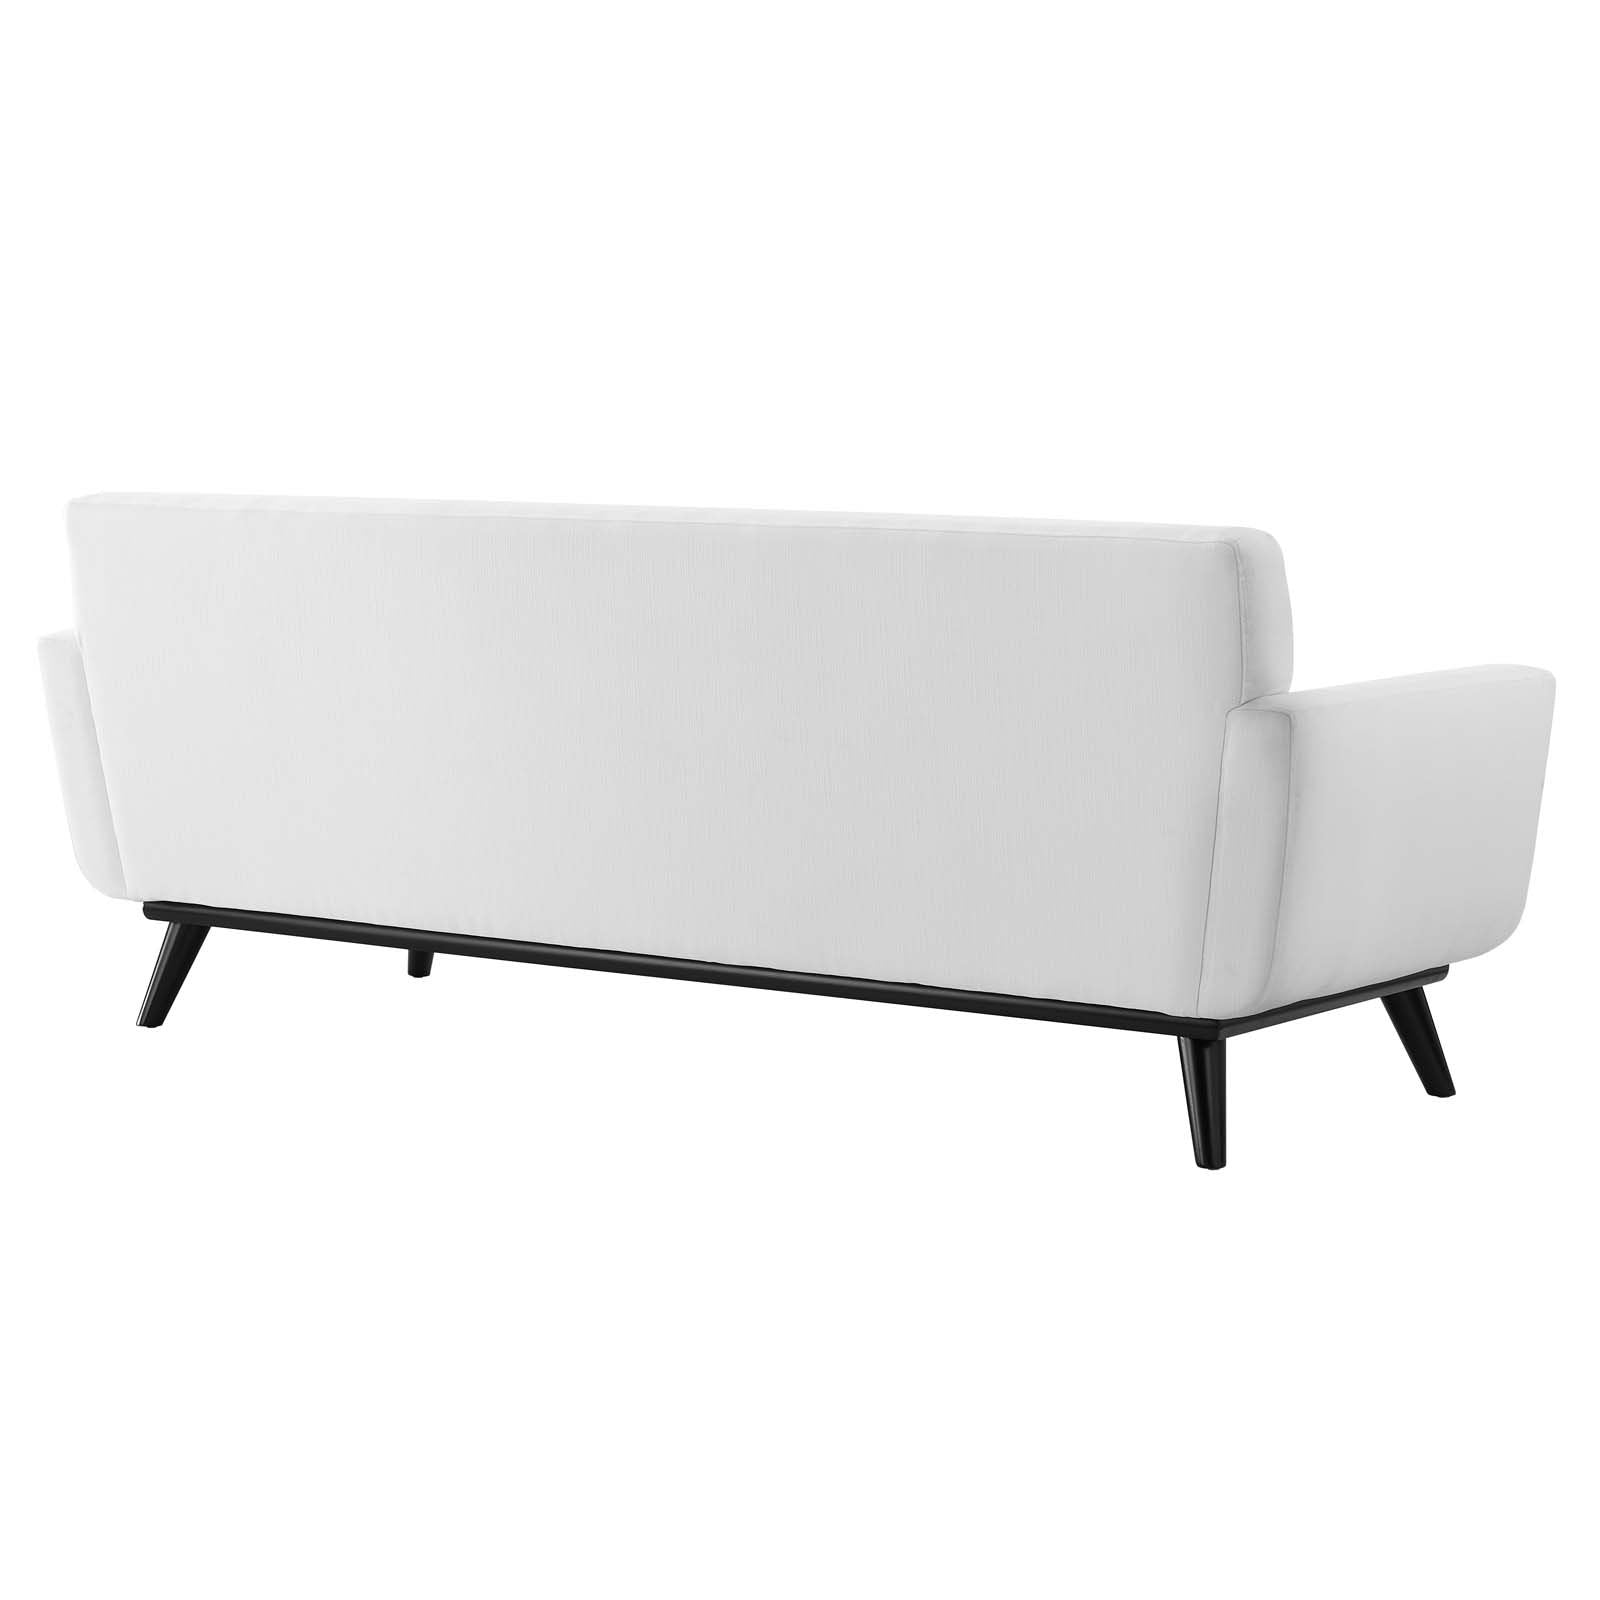 Engage Channel Tufted Fabric Sofa